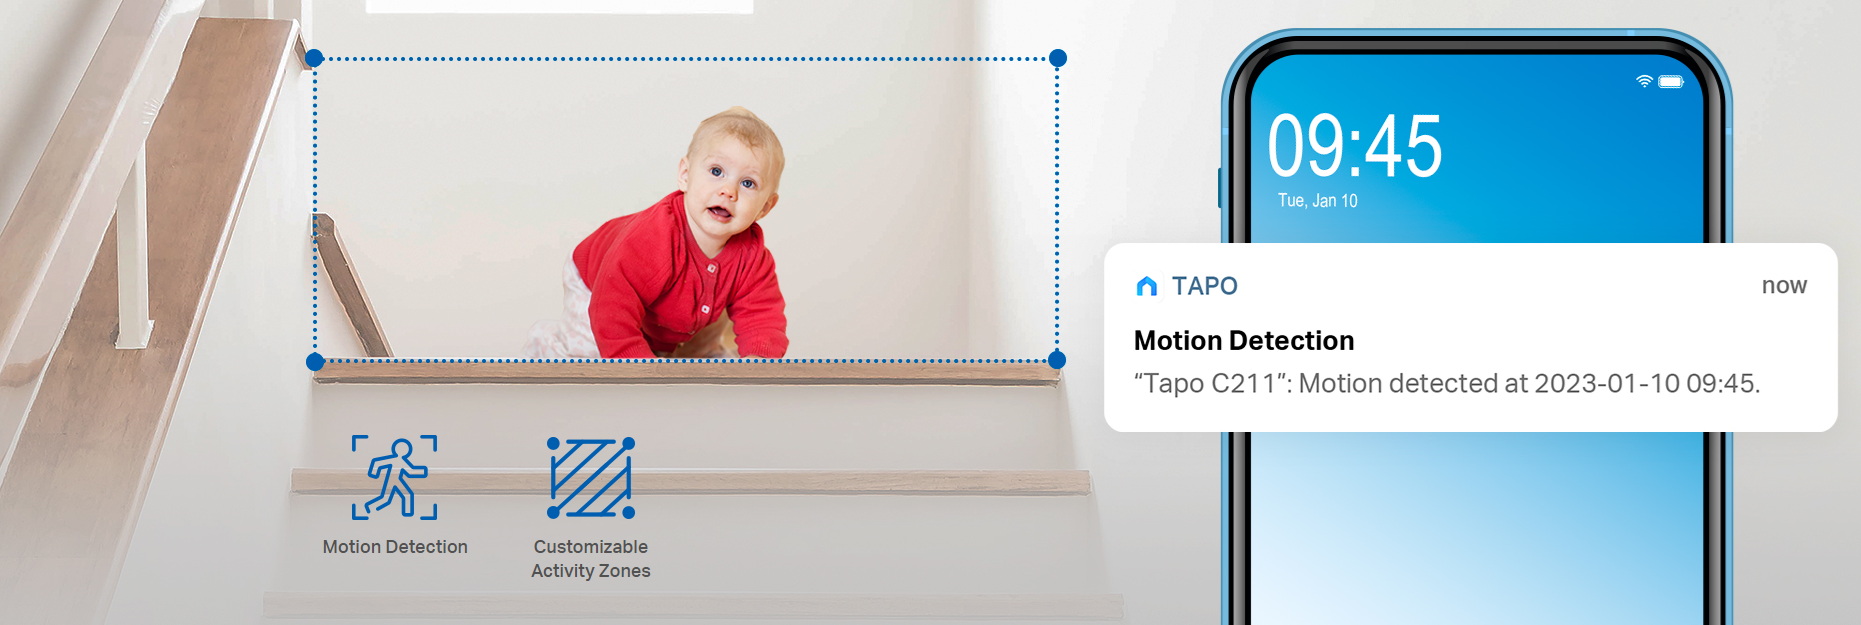 Person and Motion Detection
Receive instant notifications when a person or motion is detected. You can also set up customizable motion detection areas to only let what matters alert you.